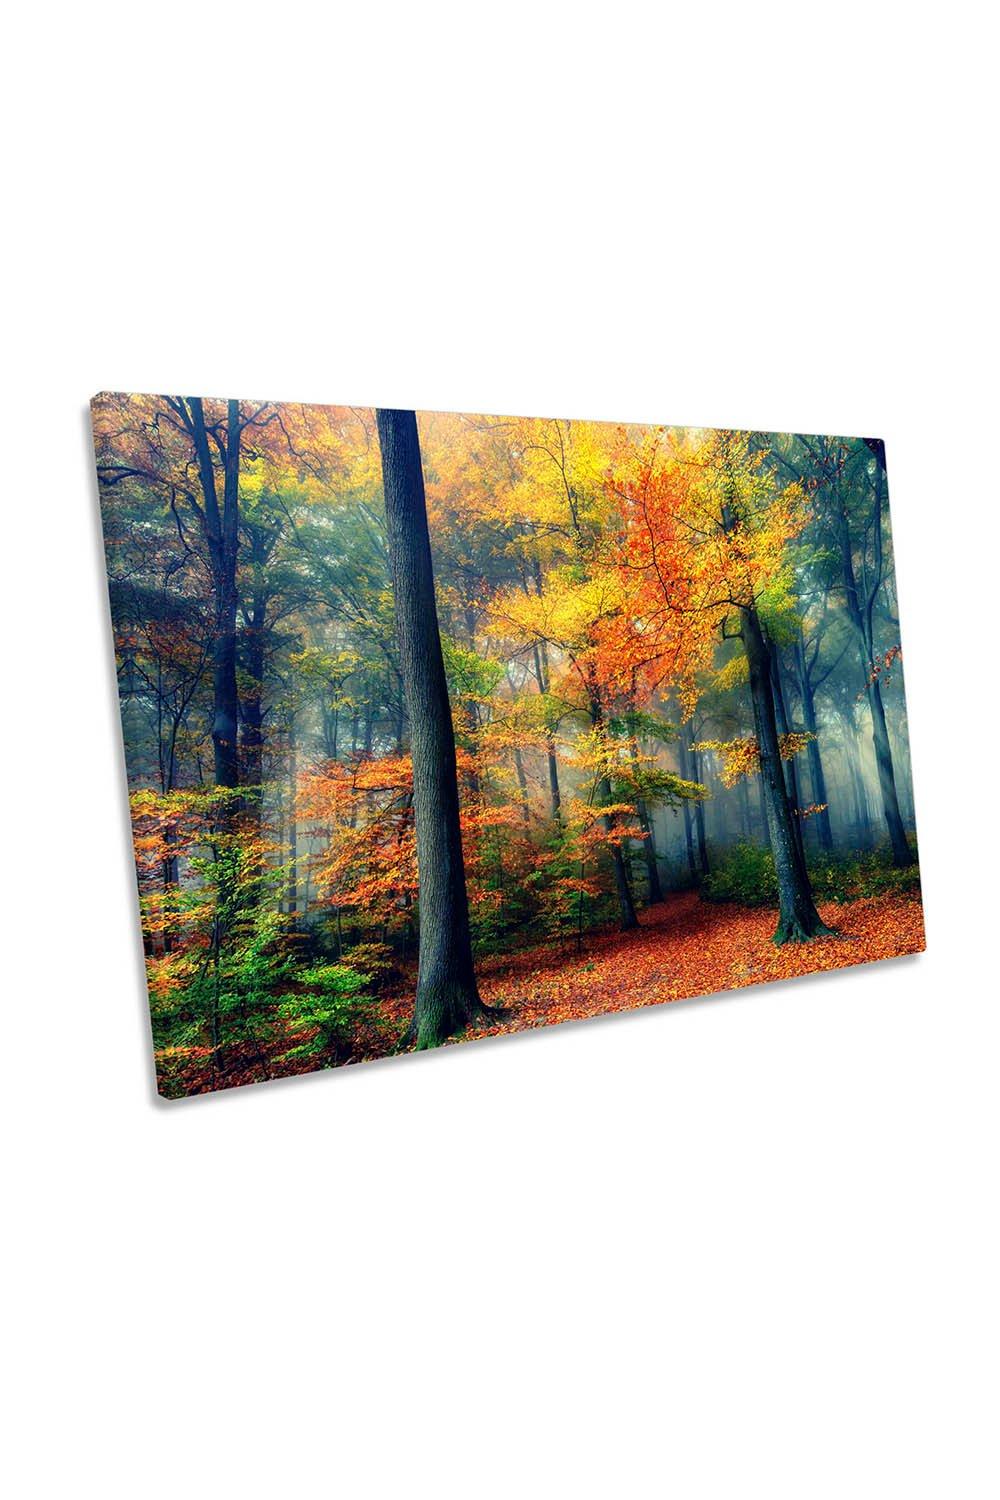 Autumn Colours in the Forest Woodland Canvas Wall Art Picture Print